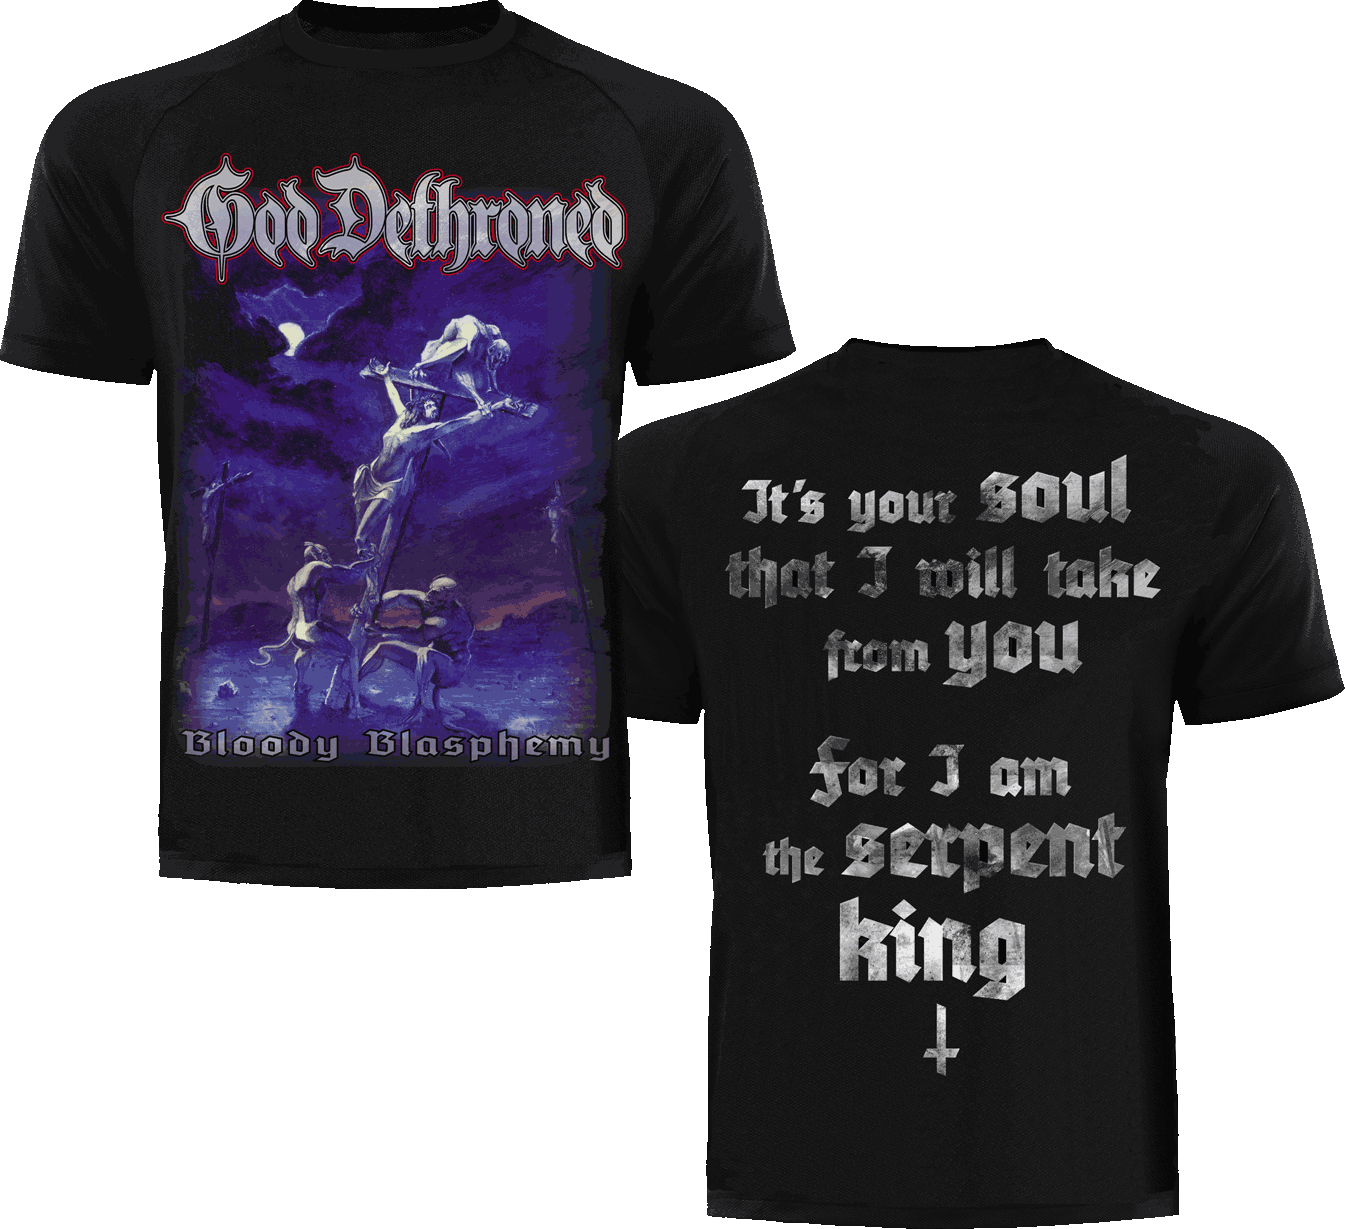 Bloody Blasphemy t-shirt by God Dethroned - front & back